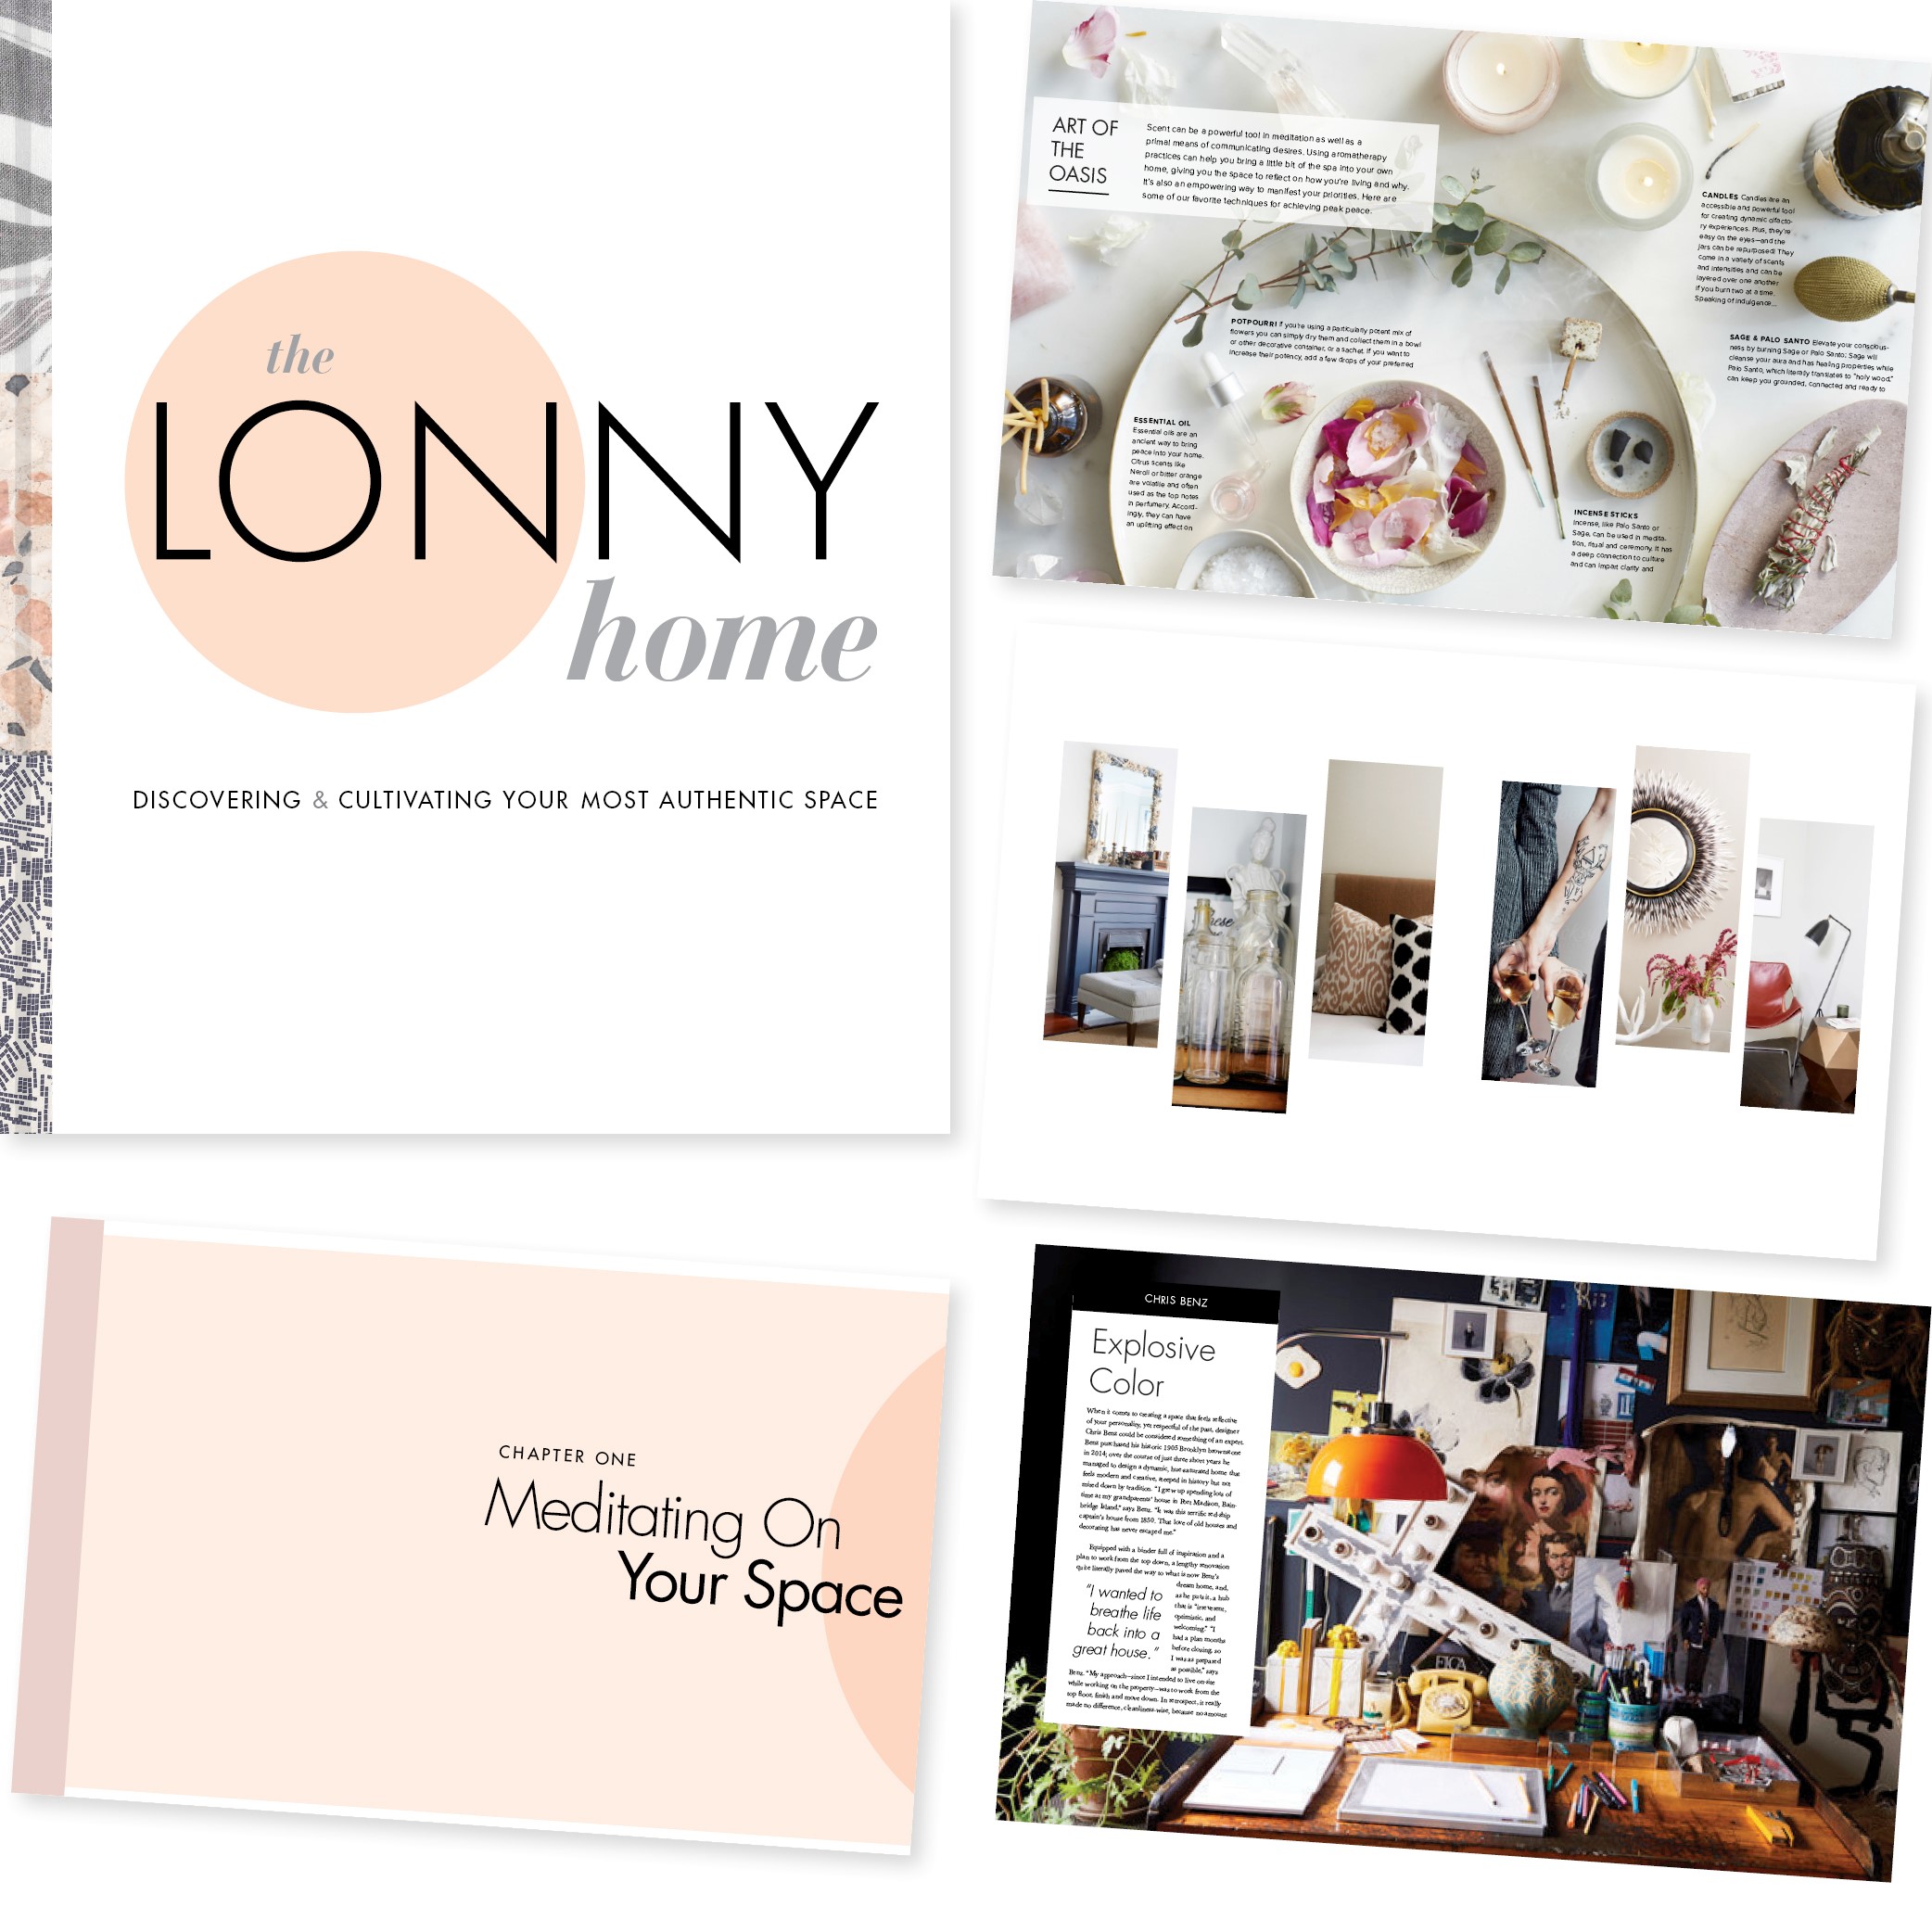 THE LONNY HOME